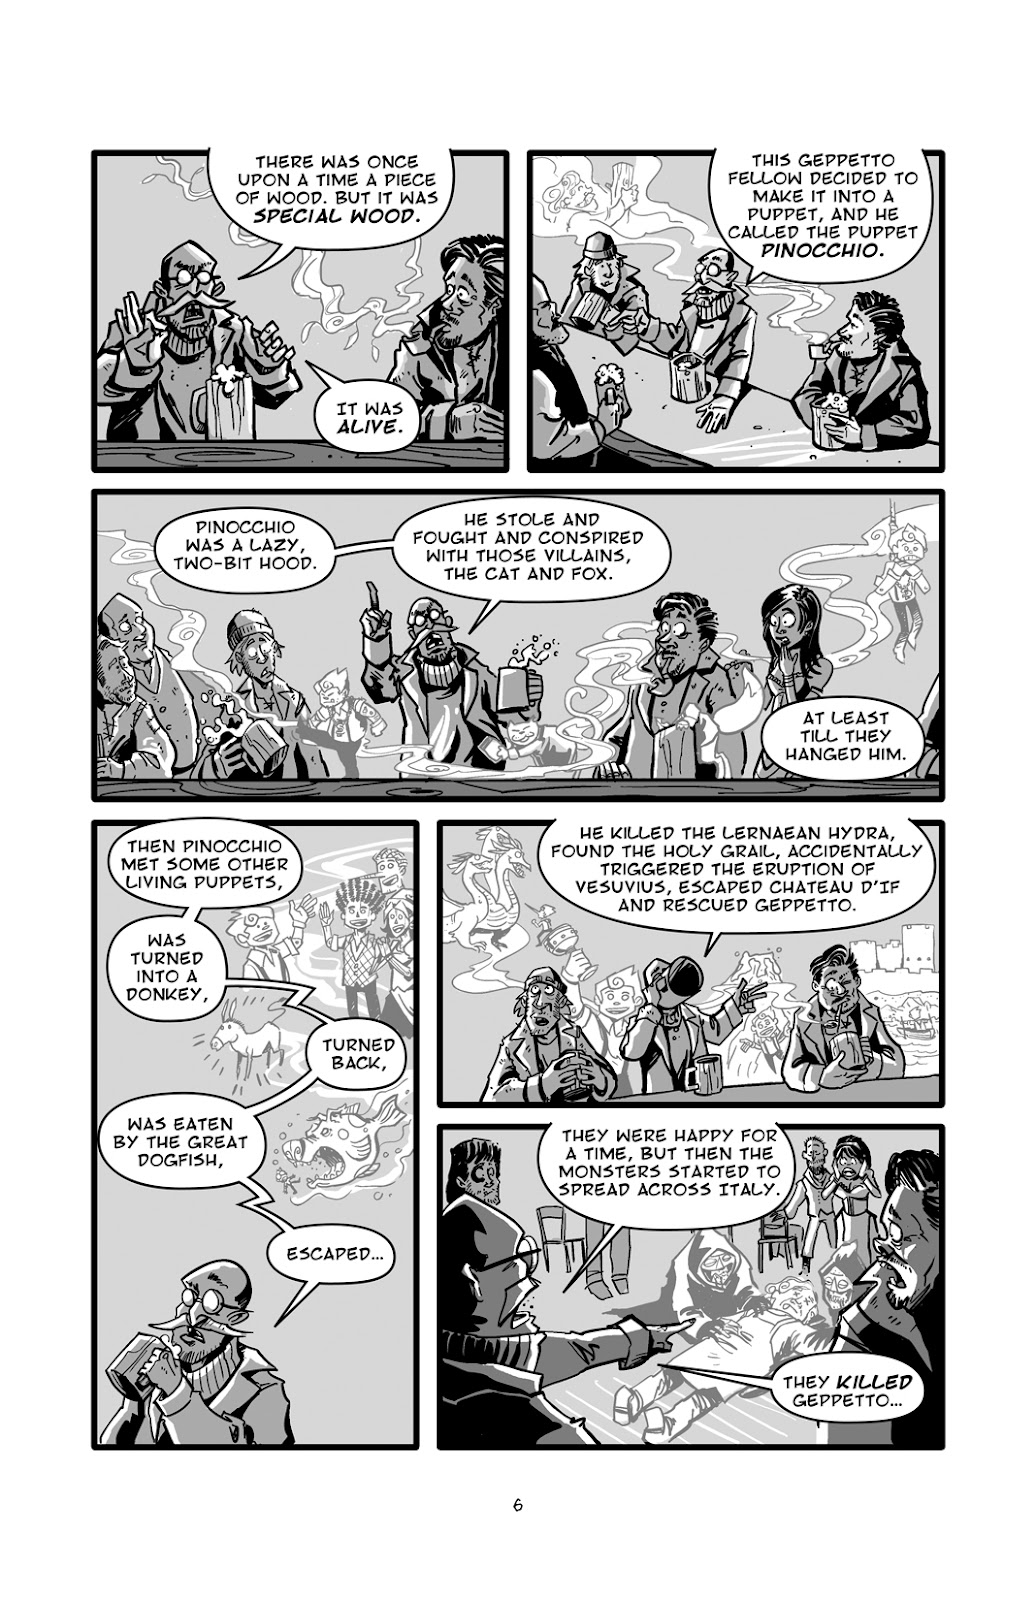 Pinocchio: Vampire Slayer - Of Wood and Blood issue 1 - Page 7